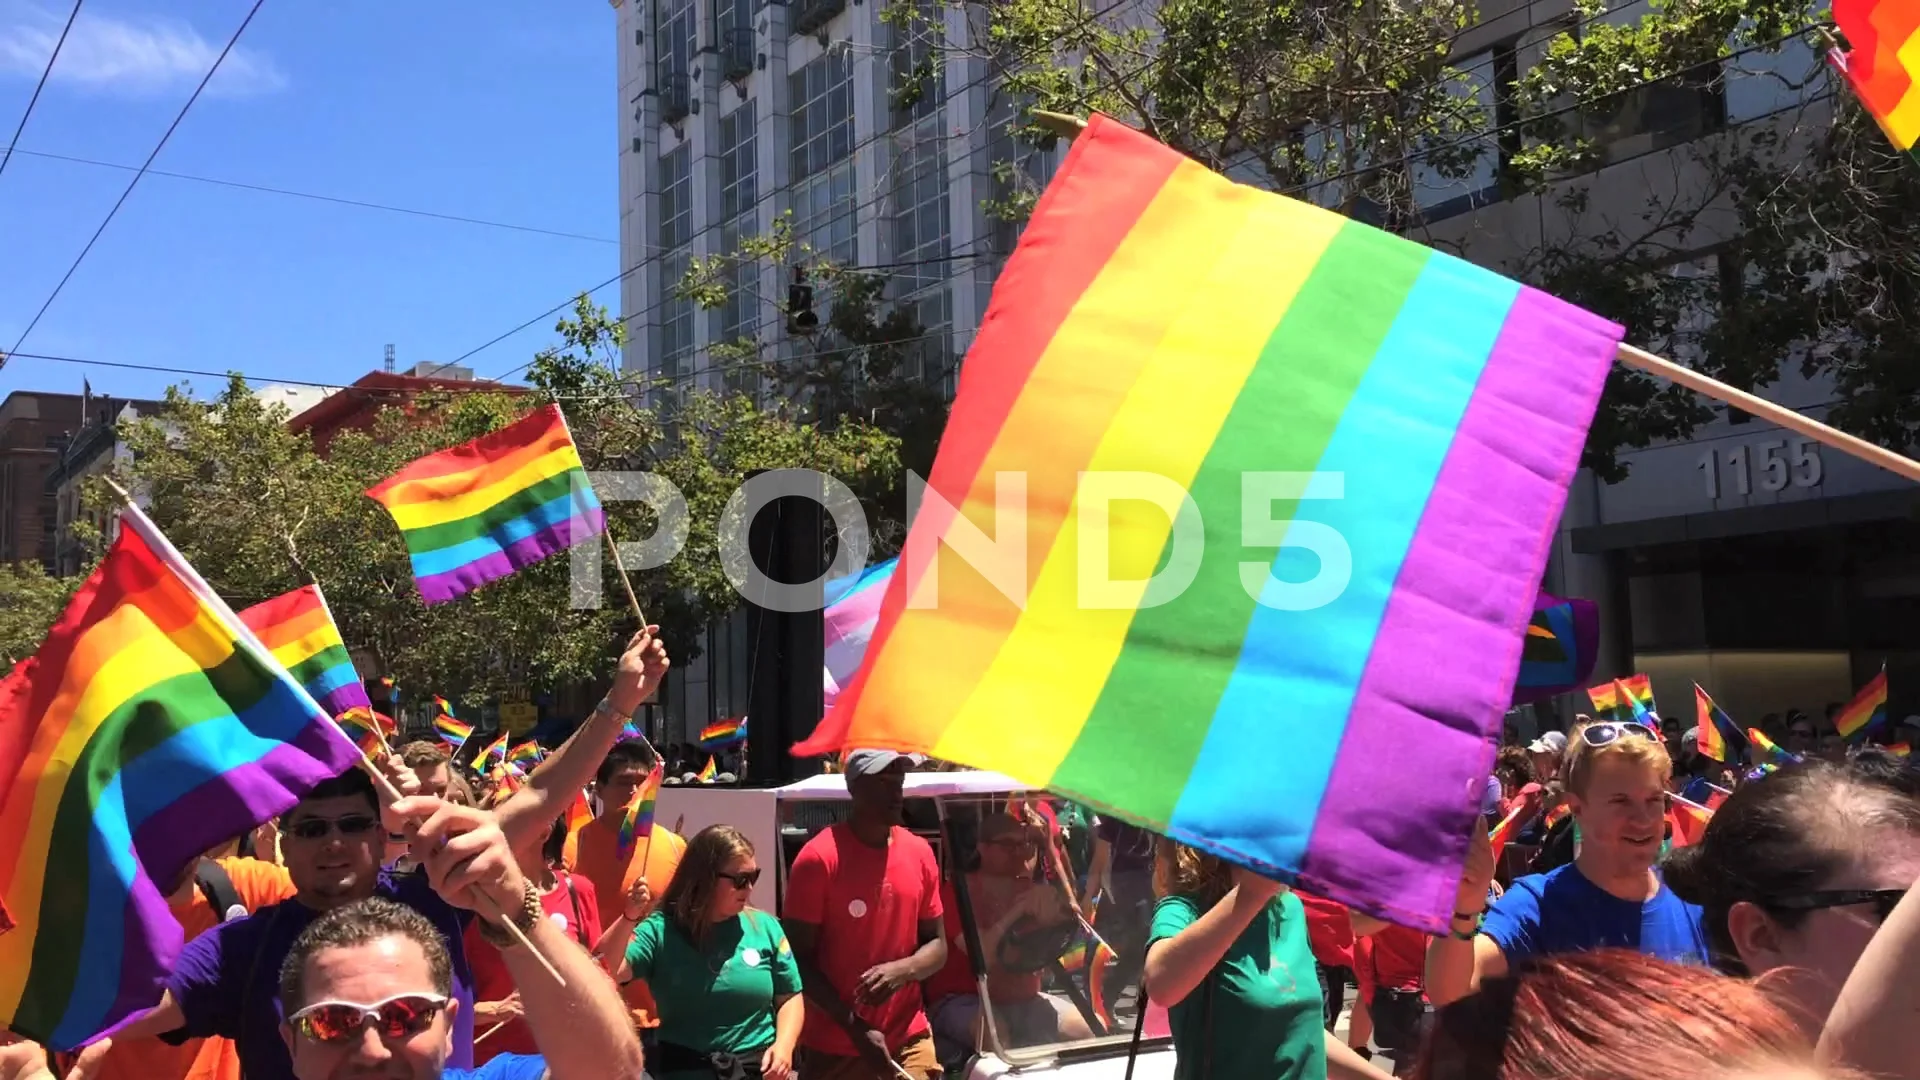 when is the gay pride parade in nyc 2016